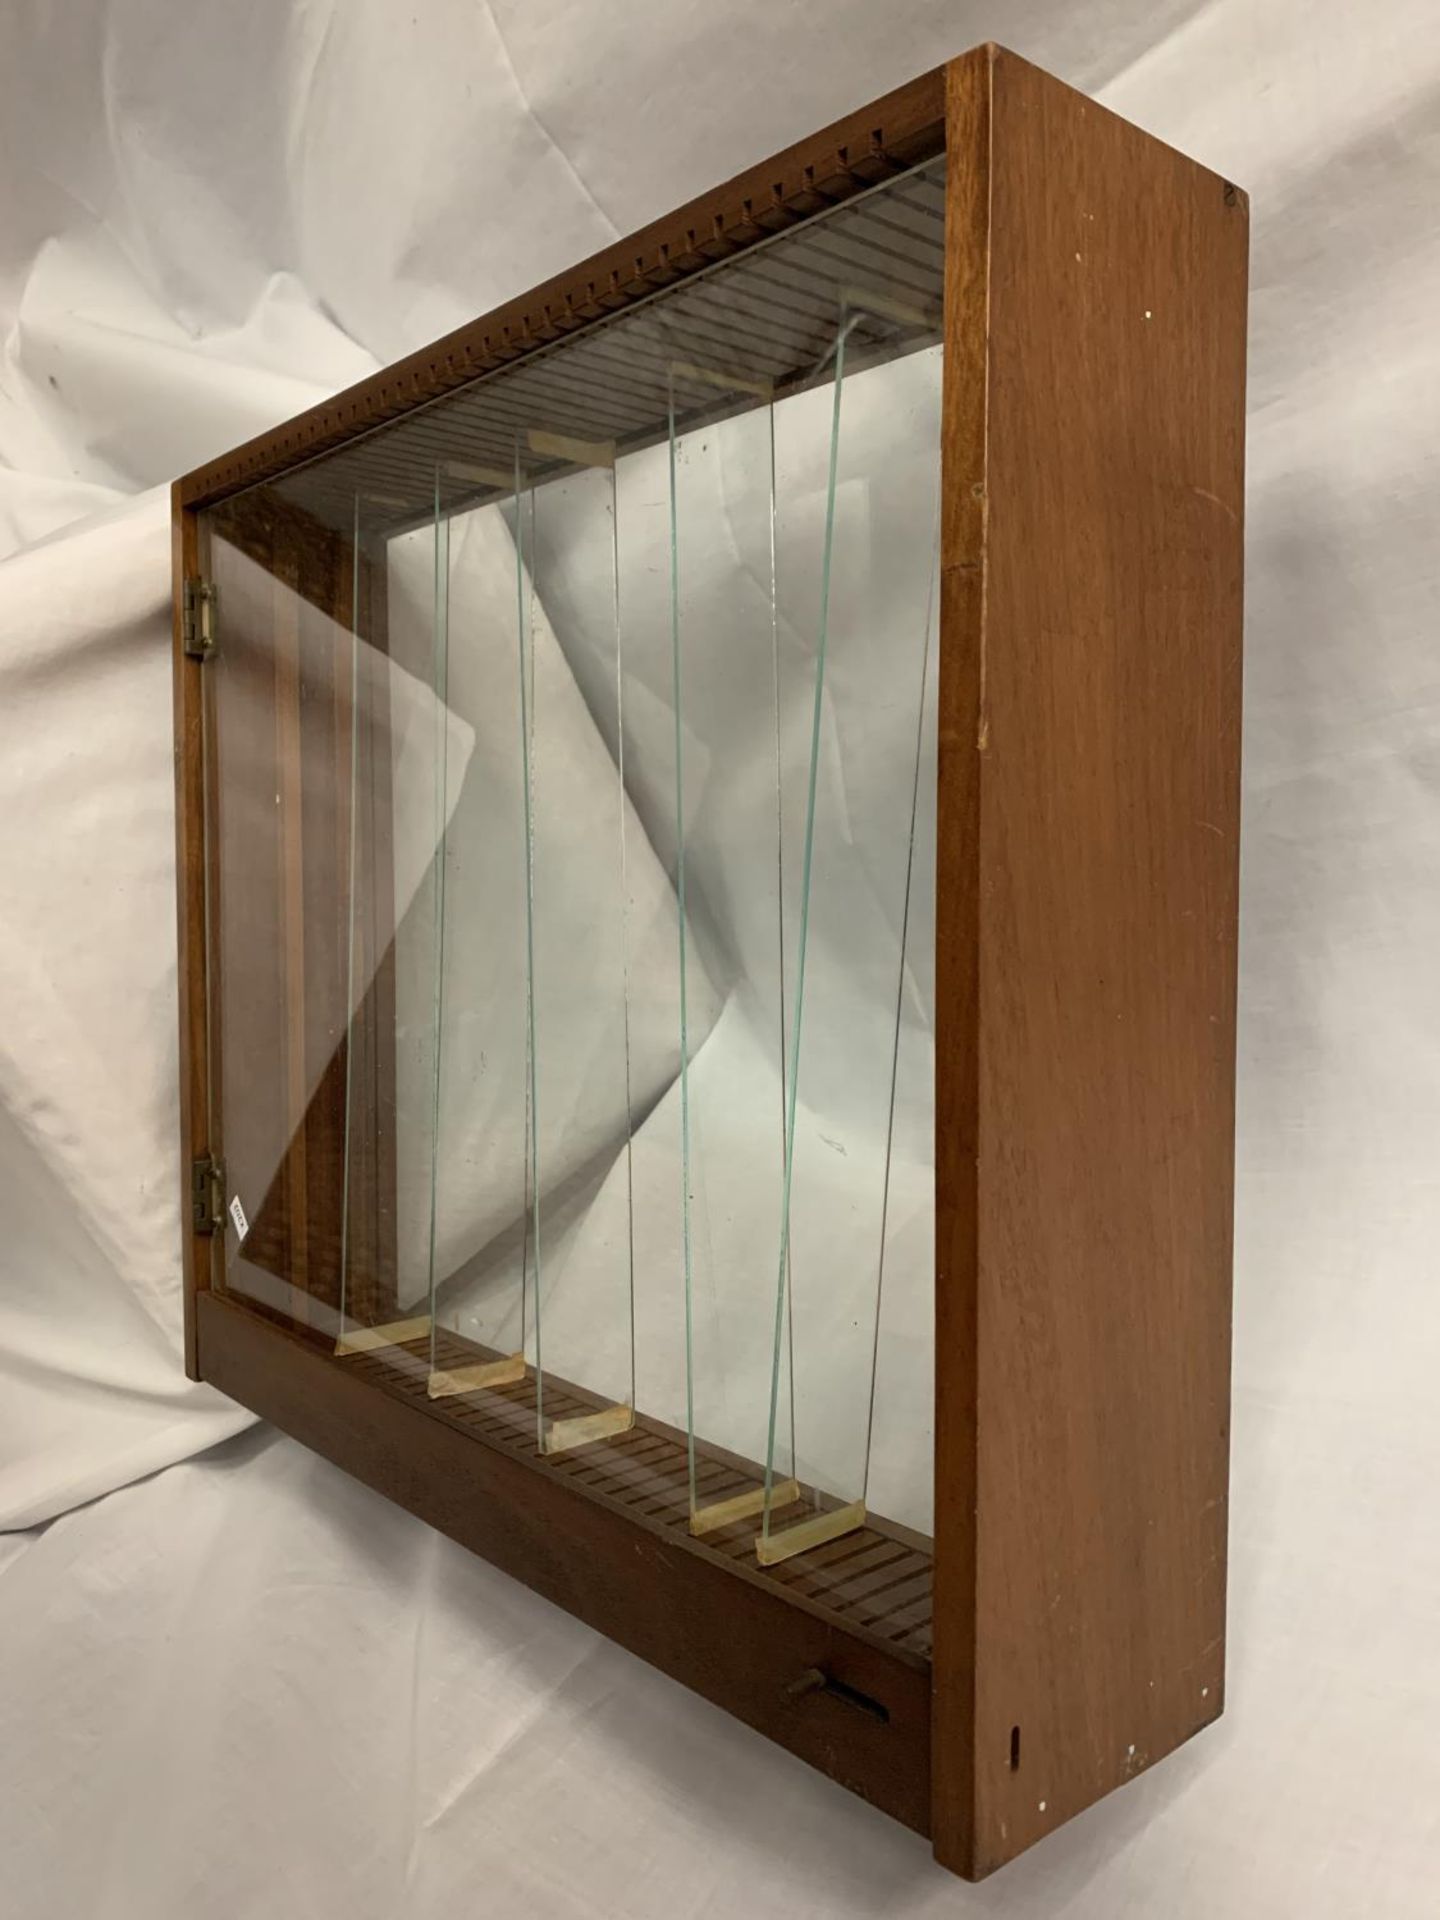 A WOODEN DISPLAY CABINET WITH ADJUSTABLE GLASS SHELVES - Image 3 of 3